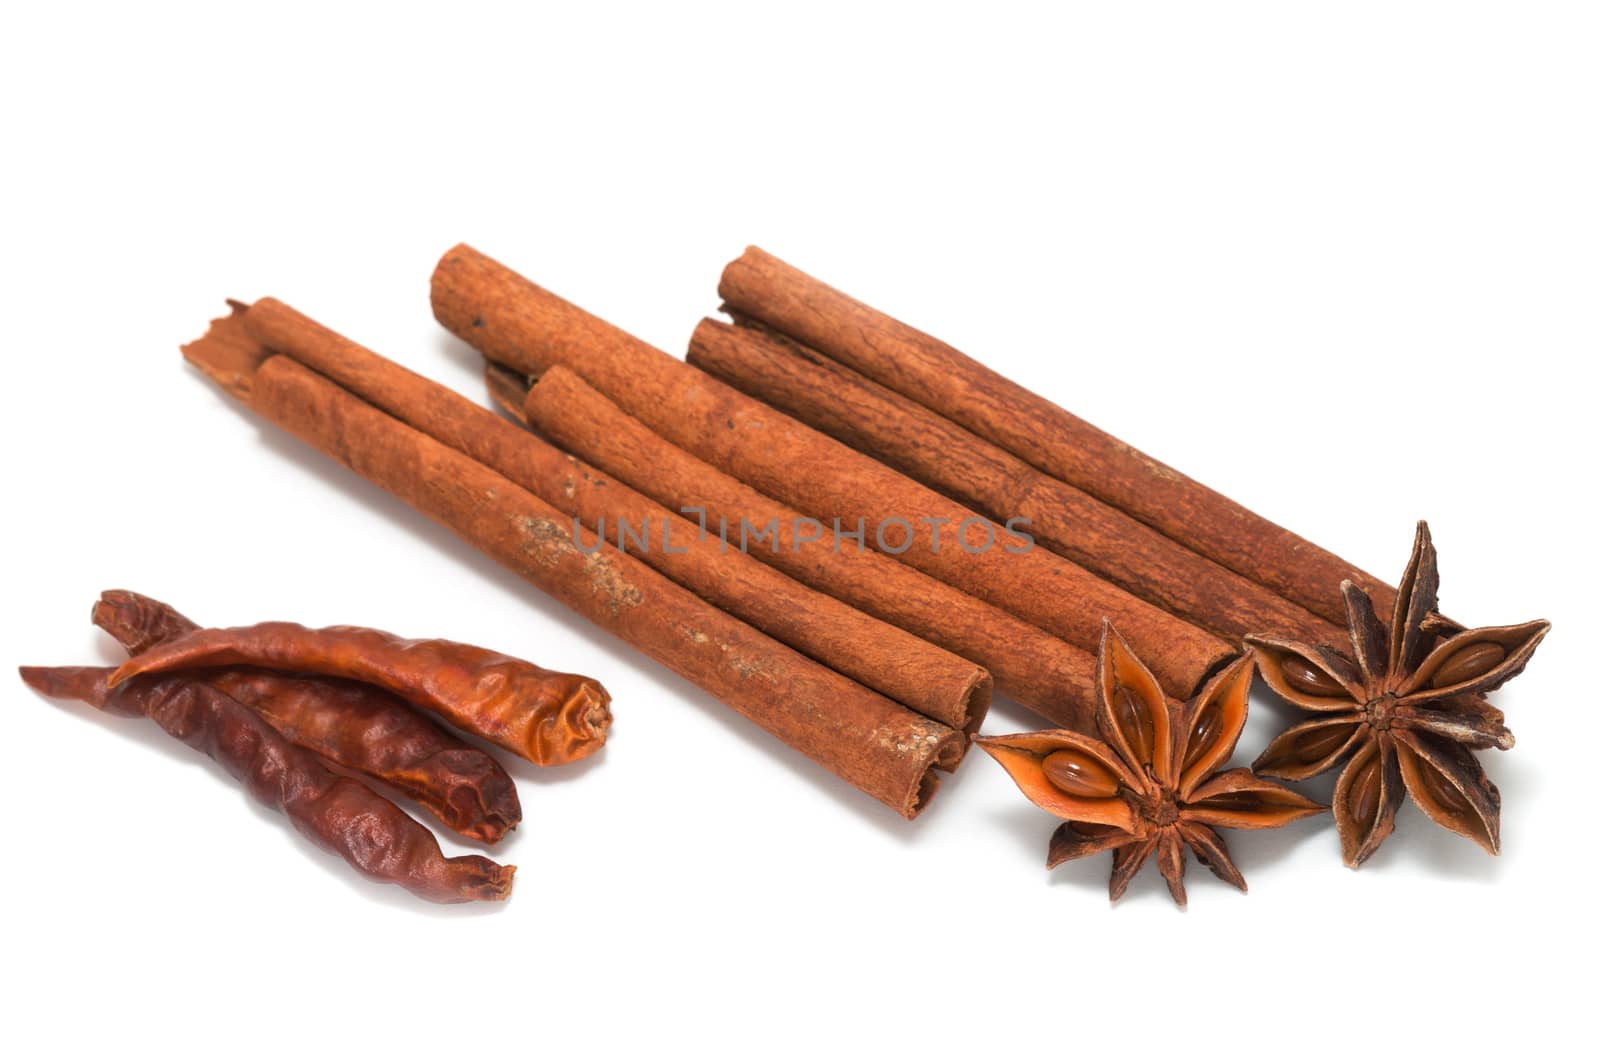 Cinnamon sticks, star anice and dried chilis on white background